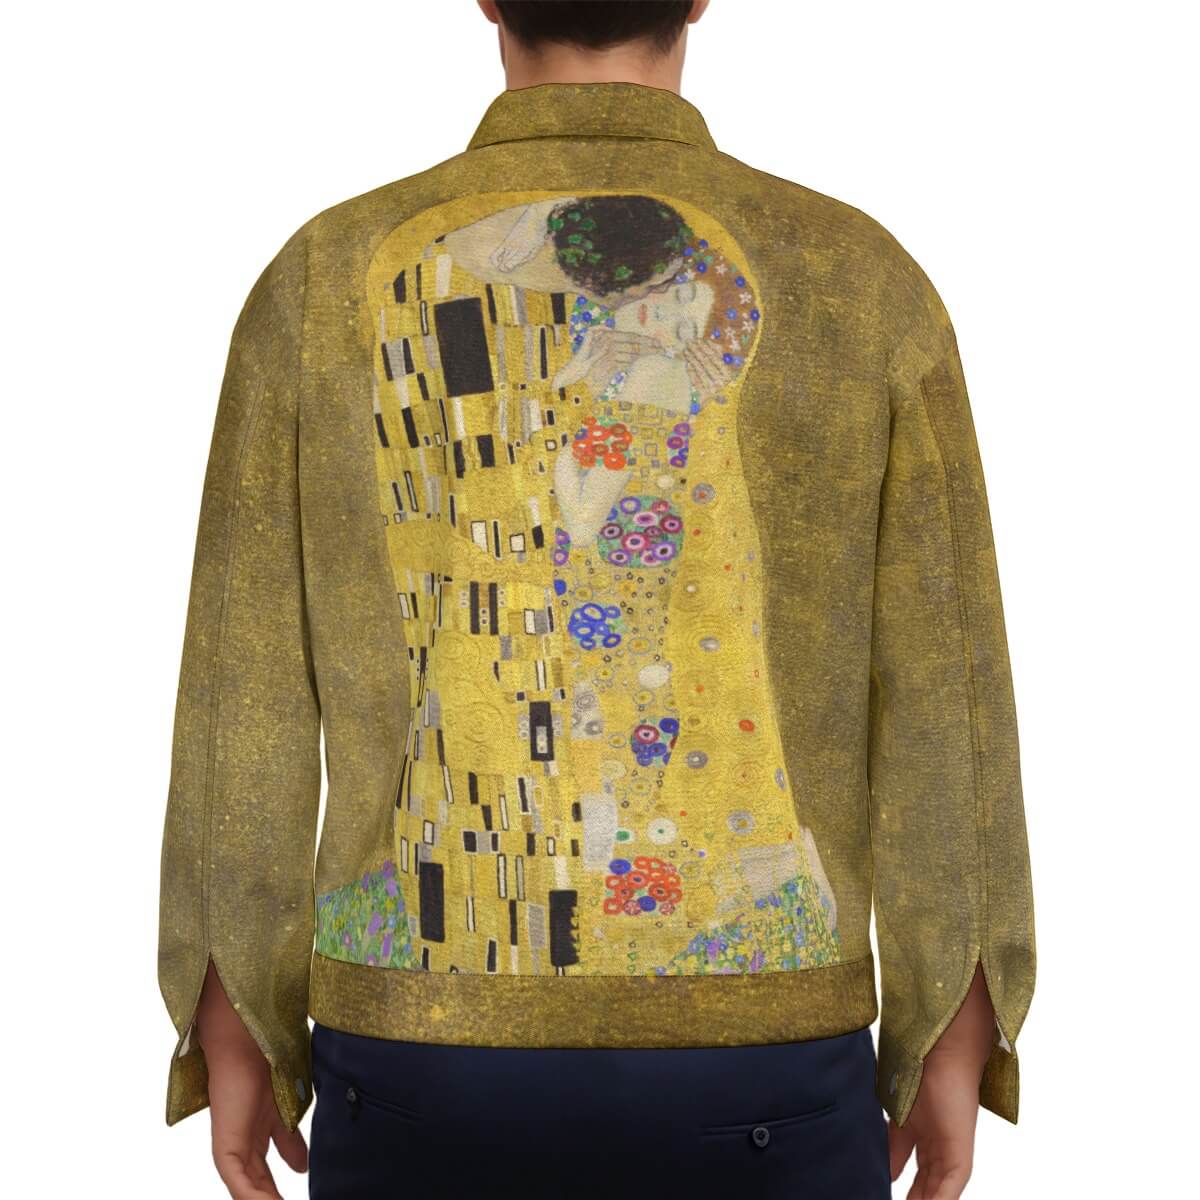 Art Inspired Outerwear for Enthusiasts